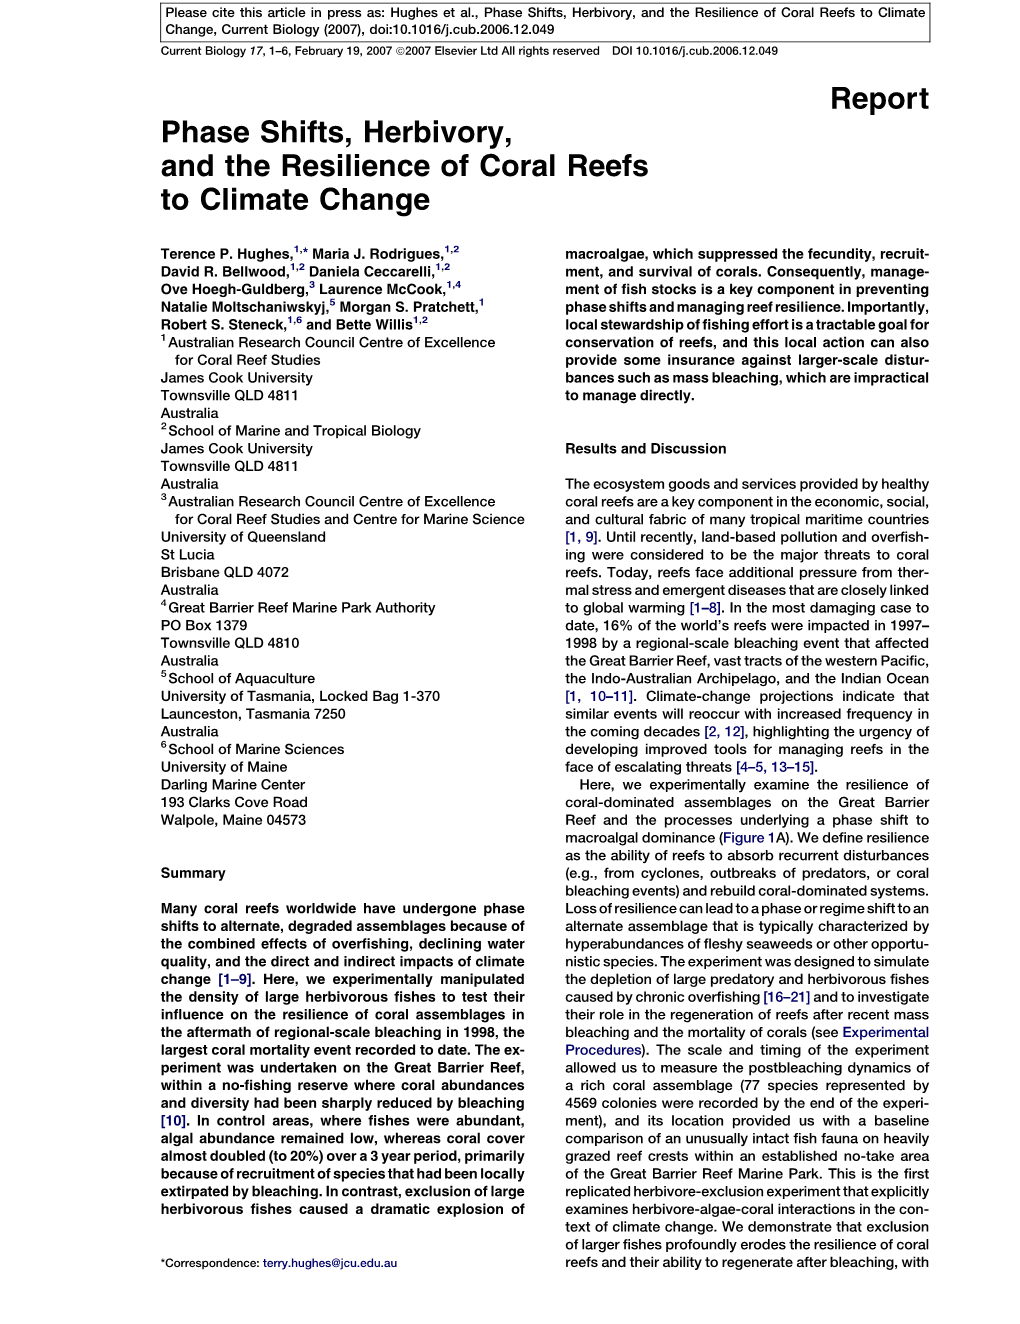 Report Phase Shifts, Herbivory, and the Resilience of Coral Reefs to Climate Change